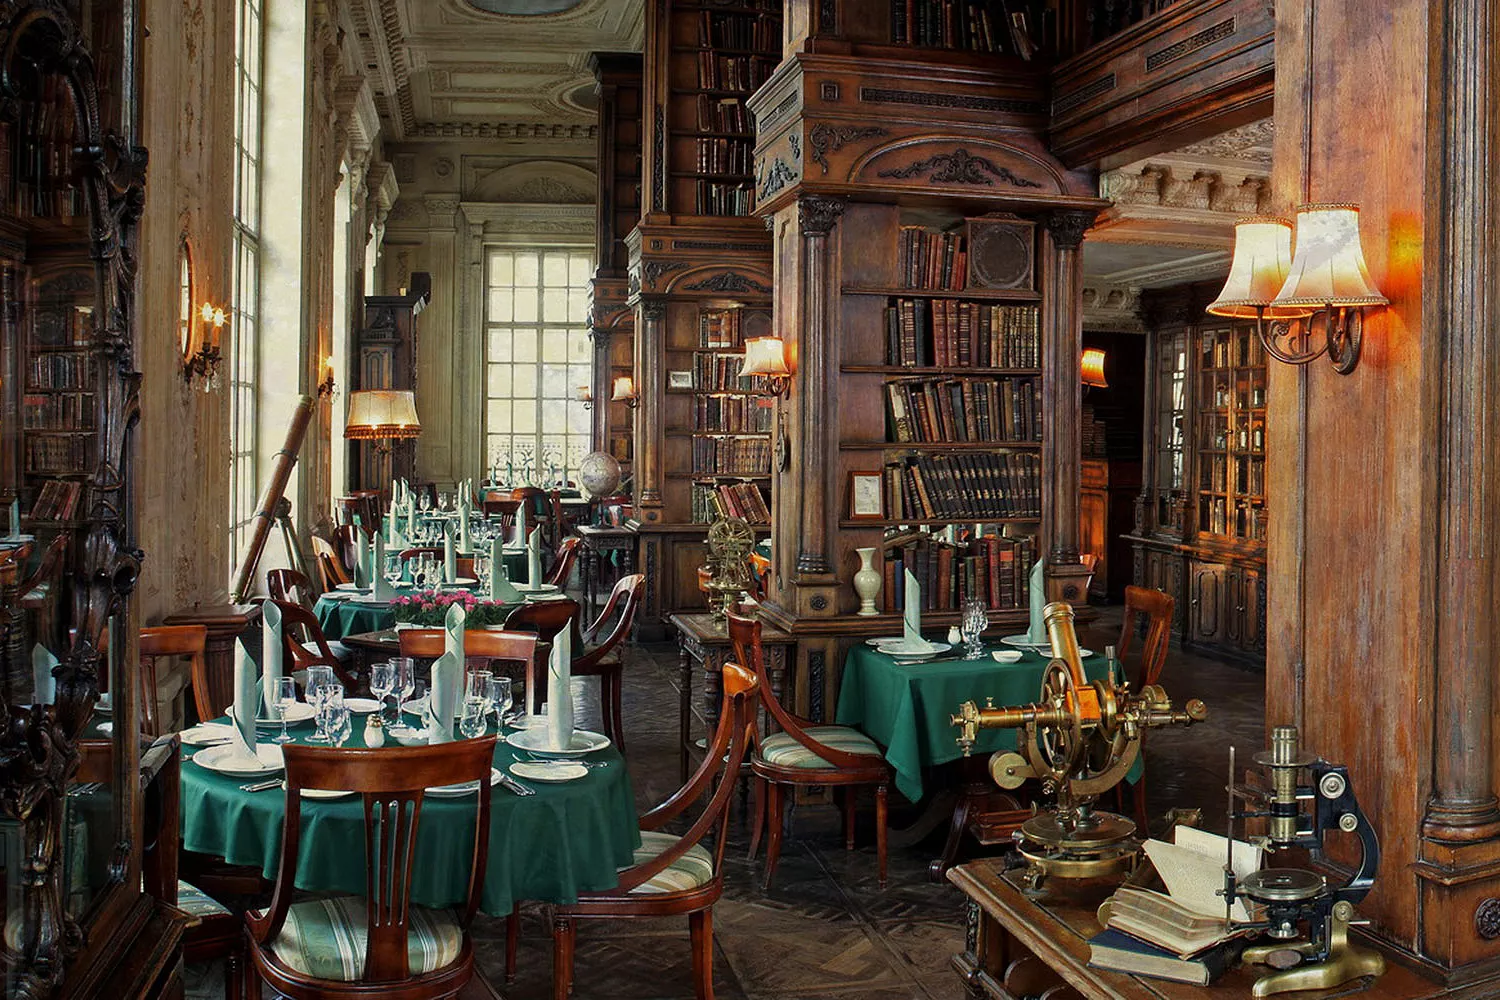 Restaurant Cafe Pushkin in Russia, Europe | Restaurants - Rated 4.2